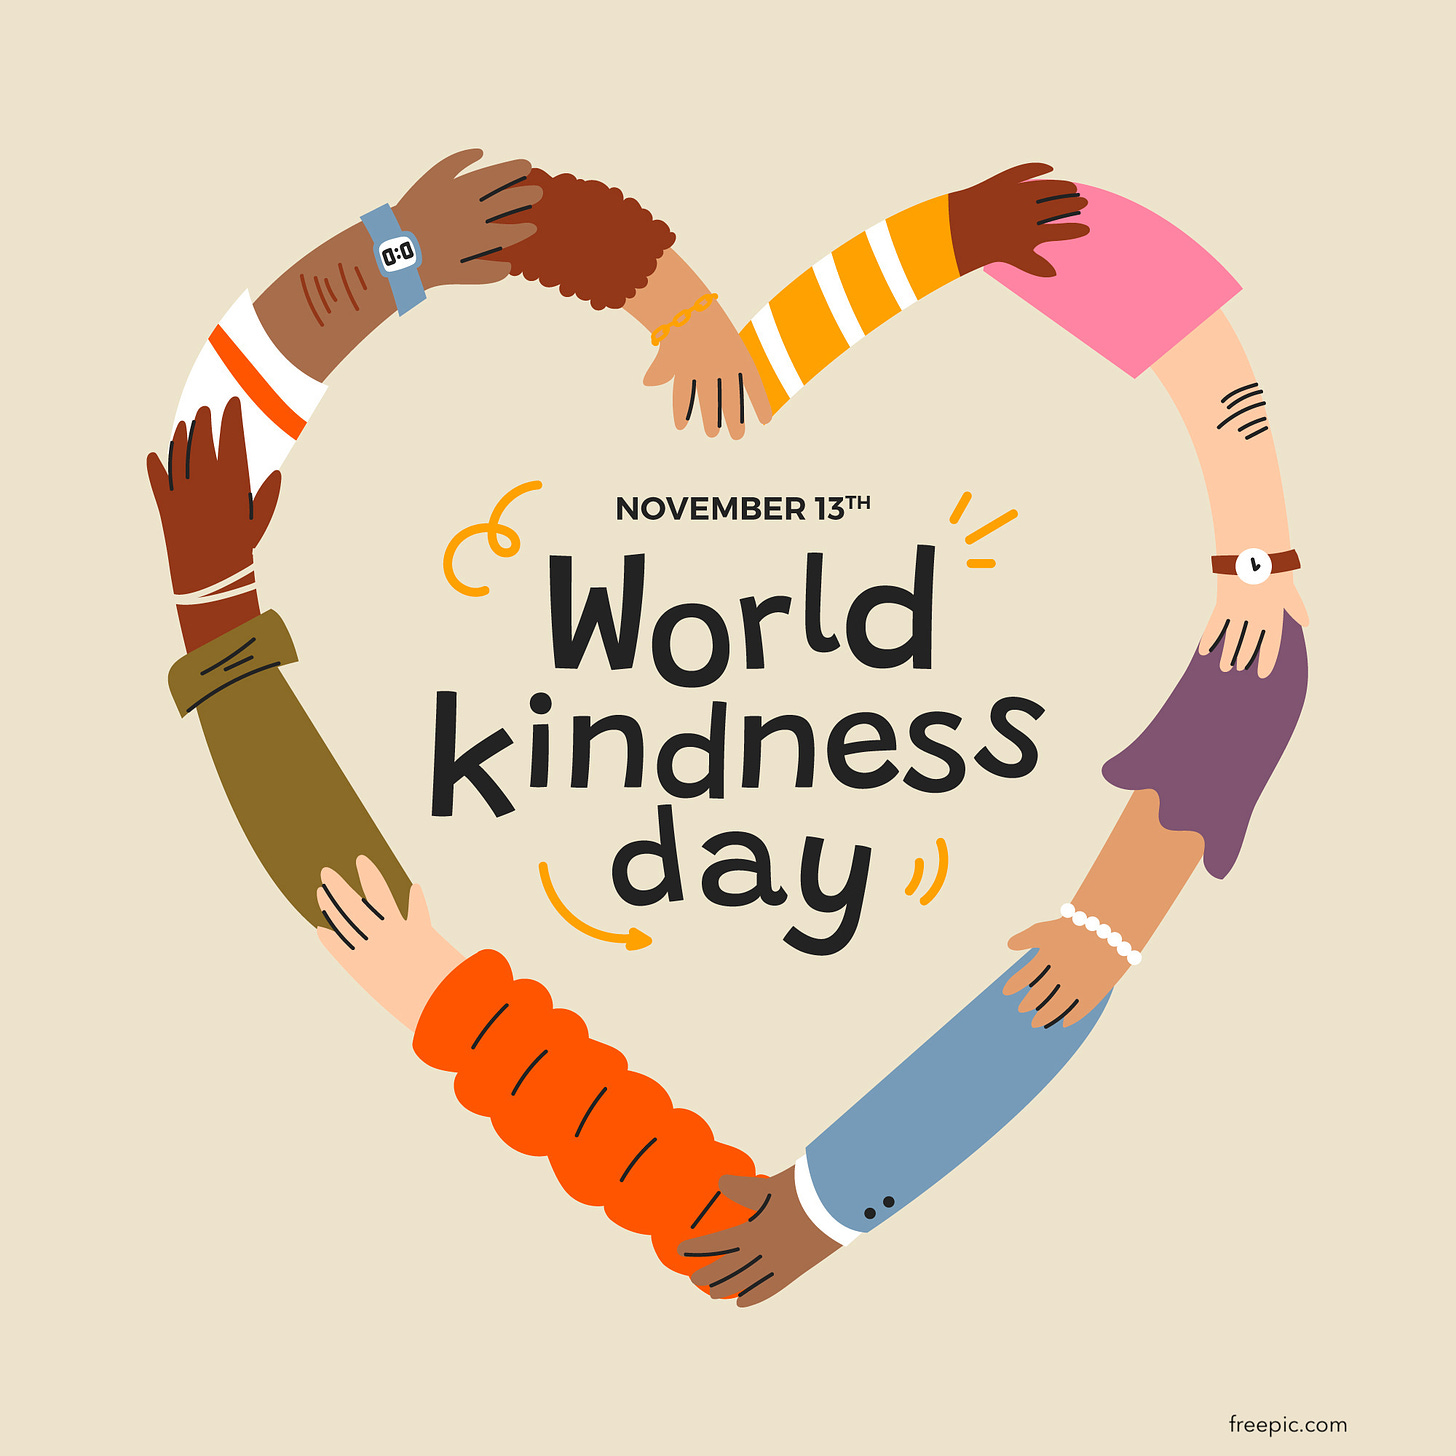 A graphic of a heart formed by interlocking forearms and hands with these words in the center: November 13 World Kindness Day